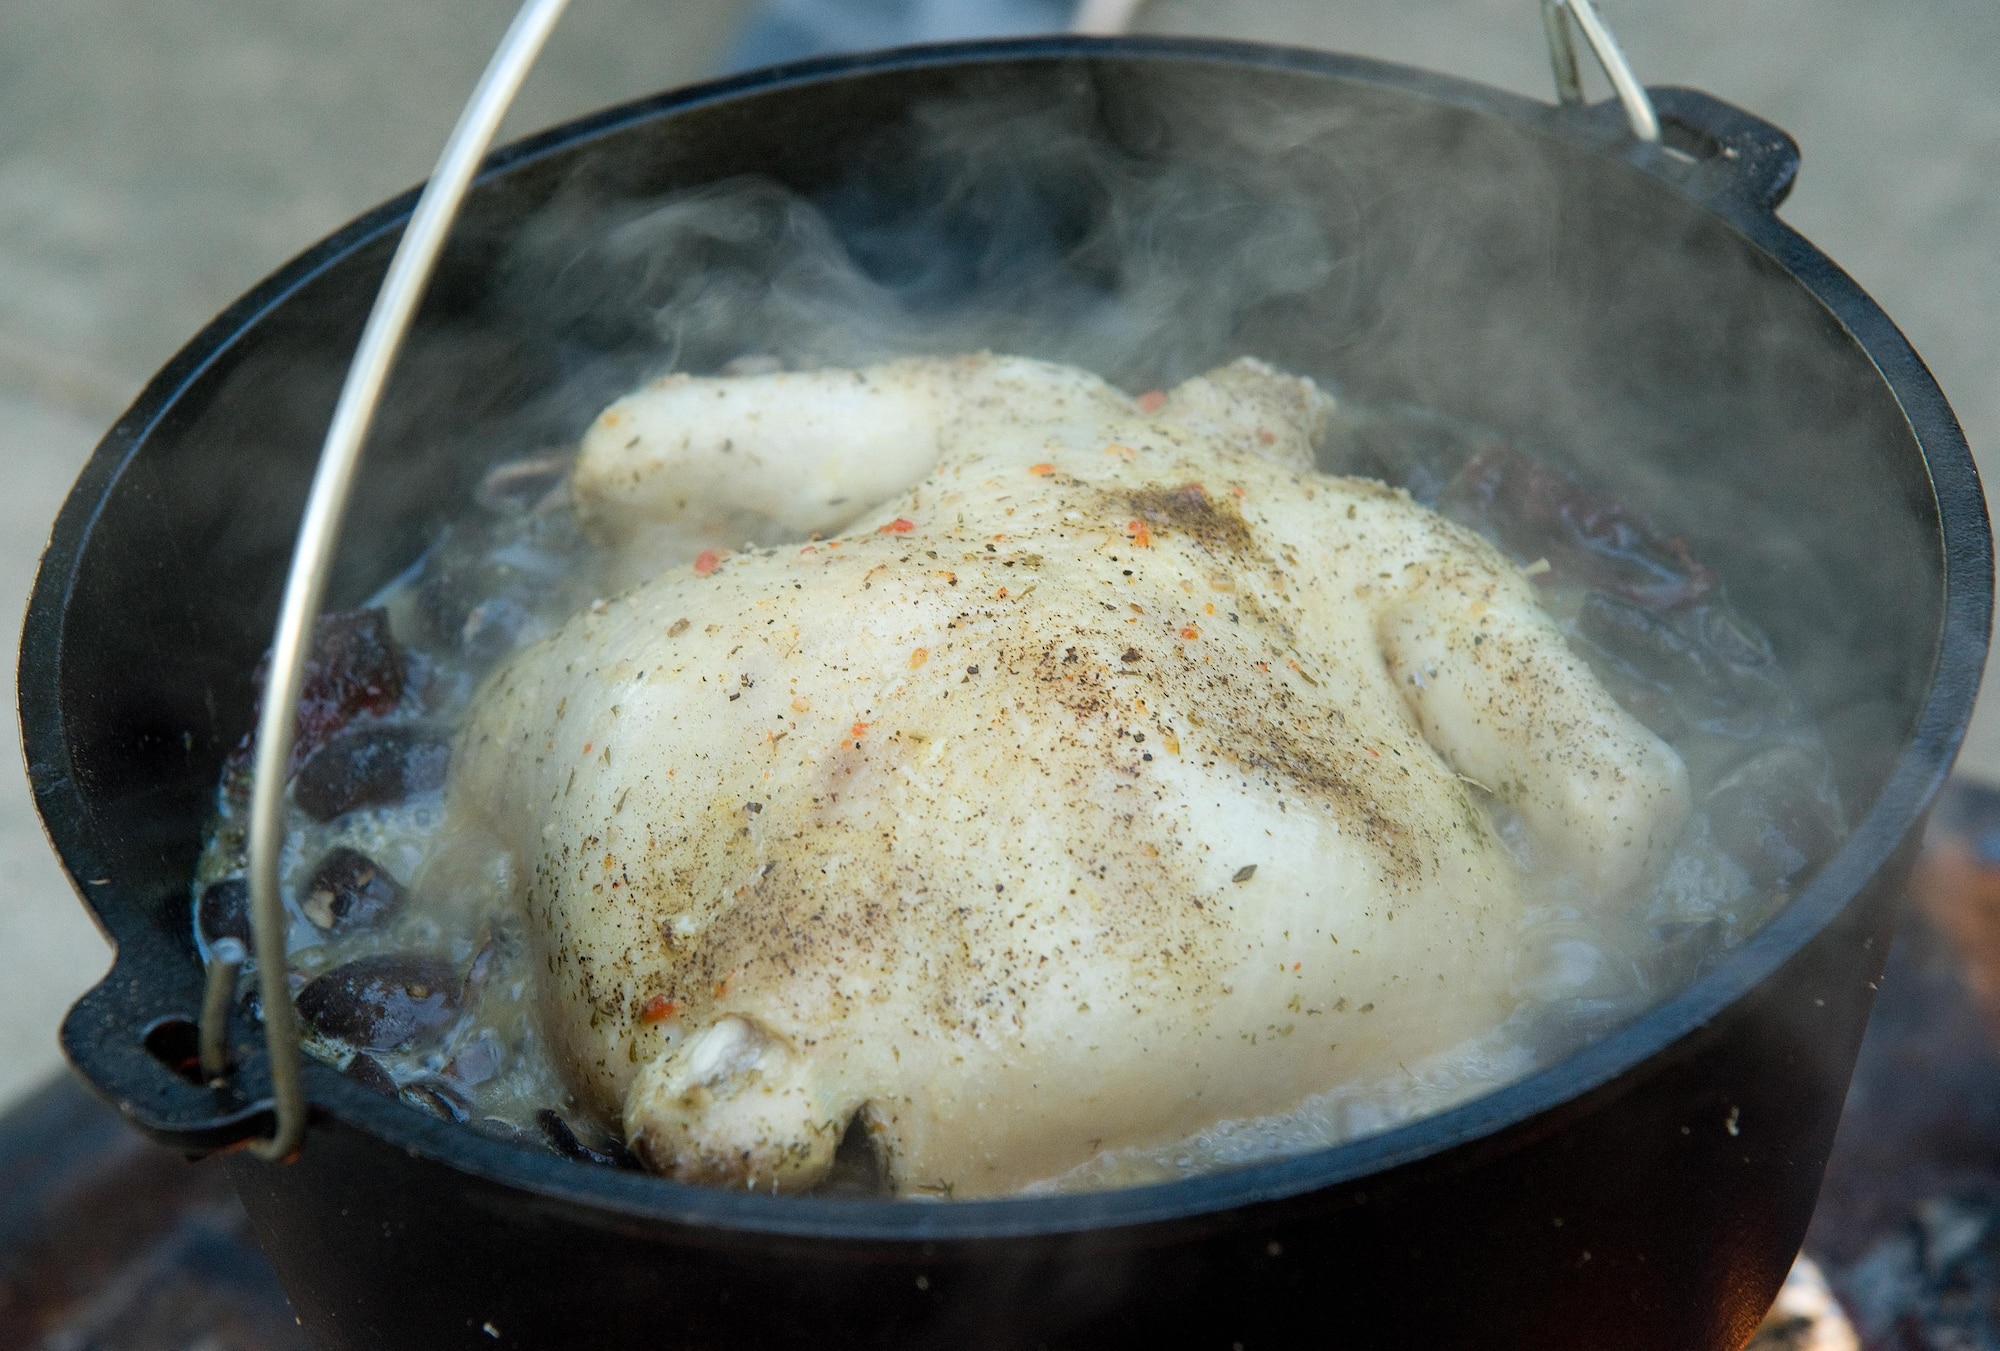 A chicken slowly boils in a Dutch oven Sept. 13, 2016, at the Eagle’s Nest picnic area on Dover Air Force Base, Del. Senior Airman William Johnson, 436th Airlift Wing photojournalist, demonstrated cooking a chicken with mushrooms, garlic butter and chipotle peppers in chicken stock to Dorm to Gourm participants. (U.S. Air Force photo by Roland Balik)